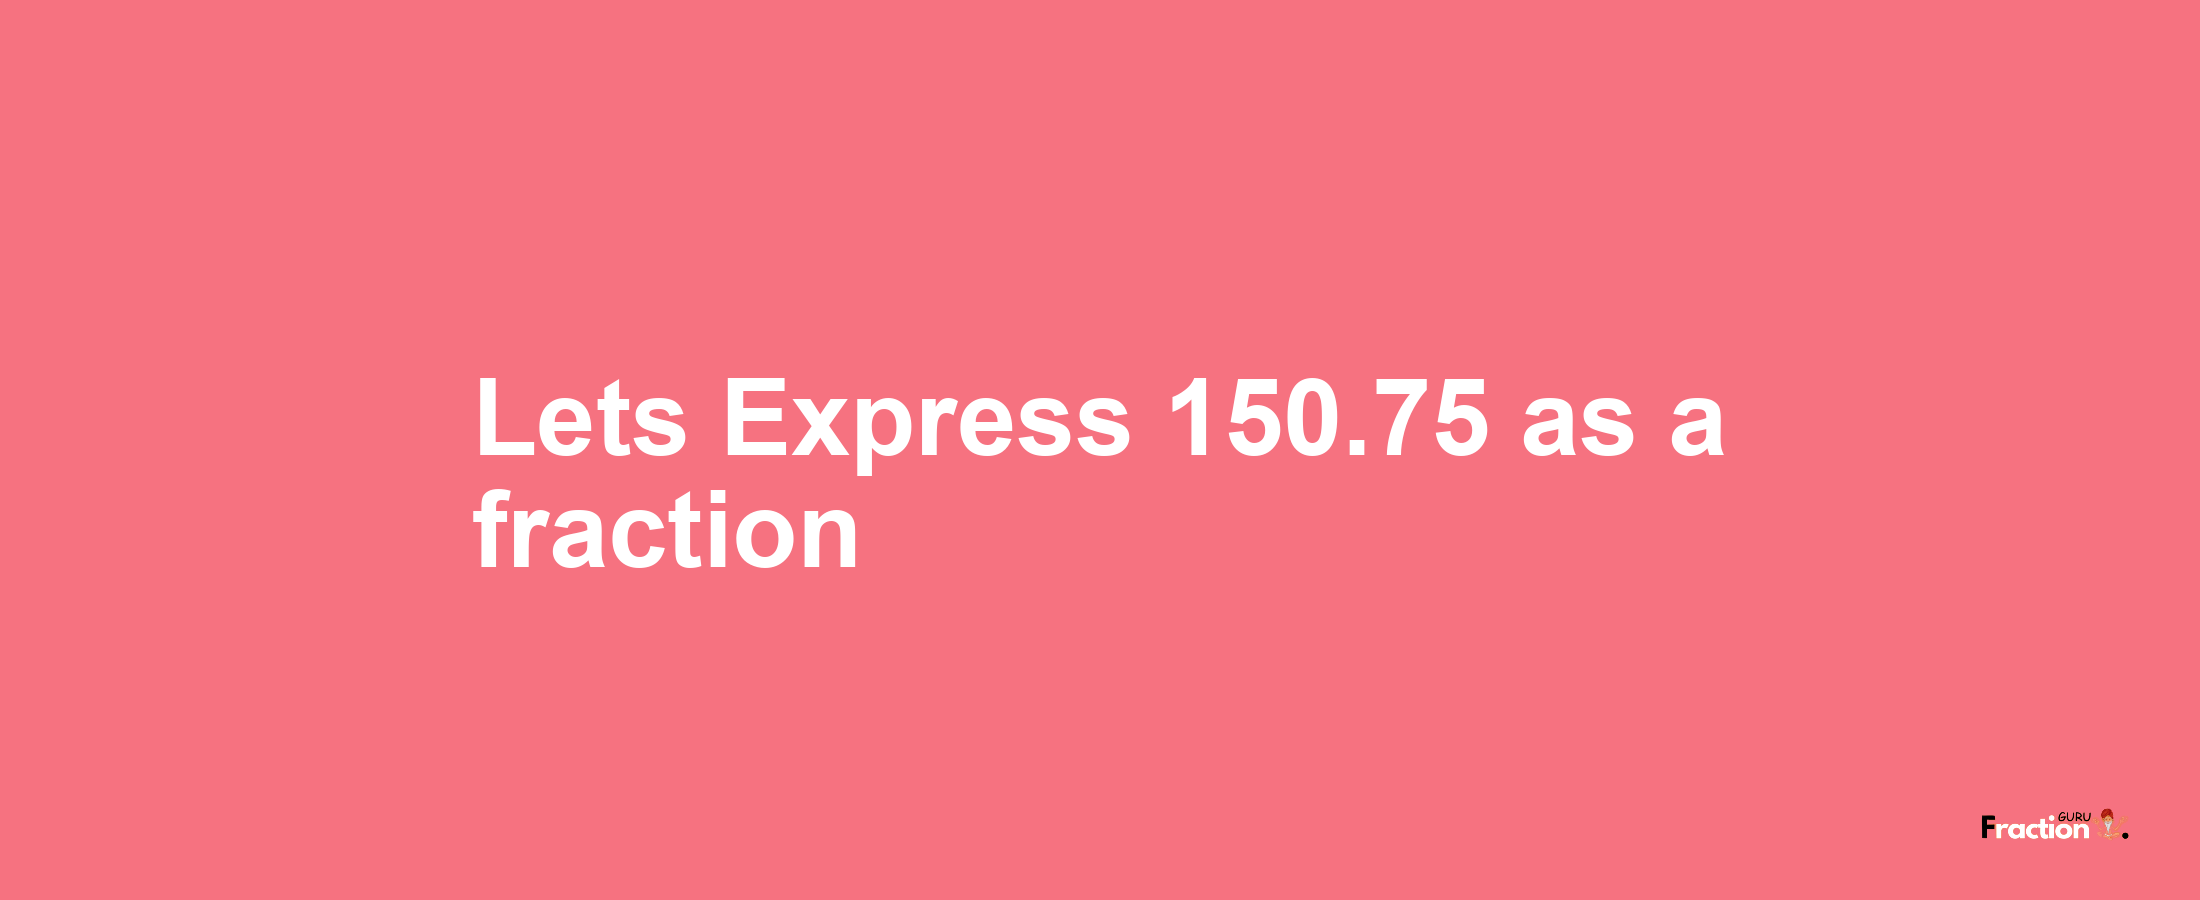 Lets Express 150.75 as afraction